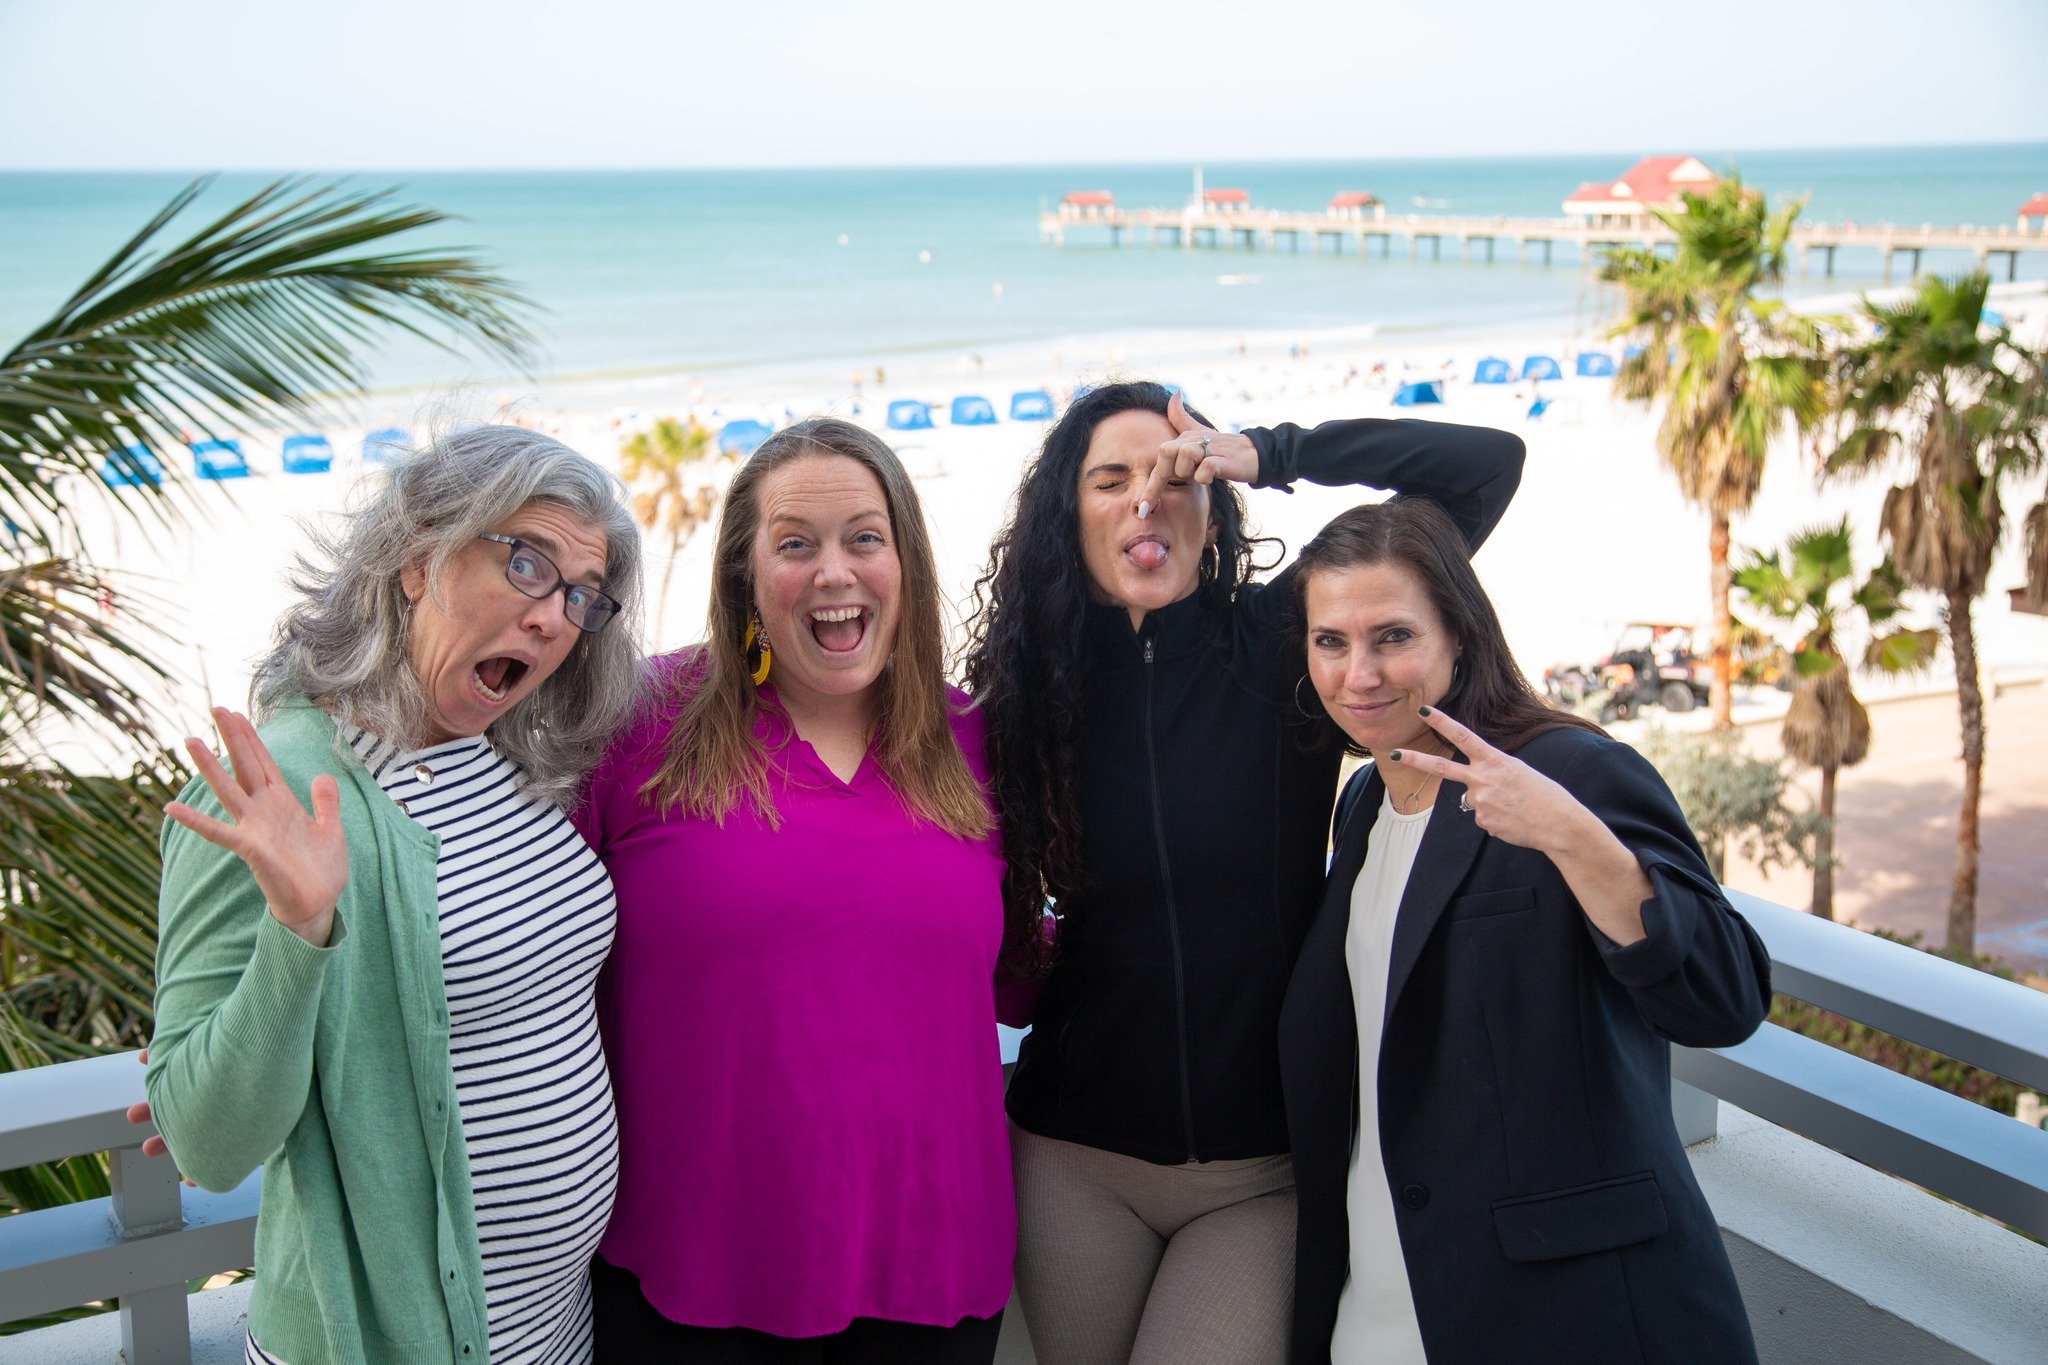 🌟💼 Calling all birthworkers! 

Ready to rejuvenate AND propel your business forward? 

The Birthworker Retreat is your chance to connect with like-minded entrepreneurs in a stunning beachside setting. 

From deep rest to deep productivity, our retr